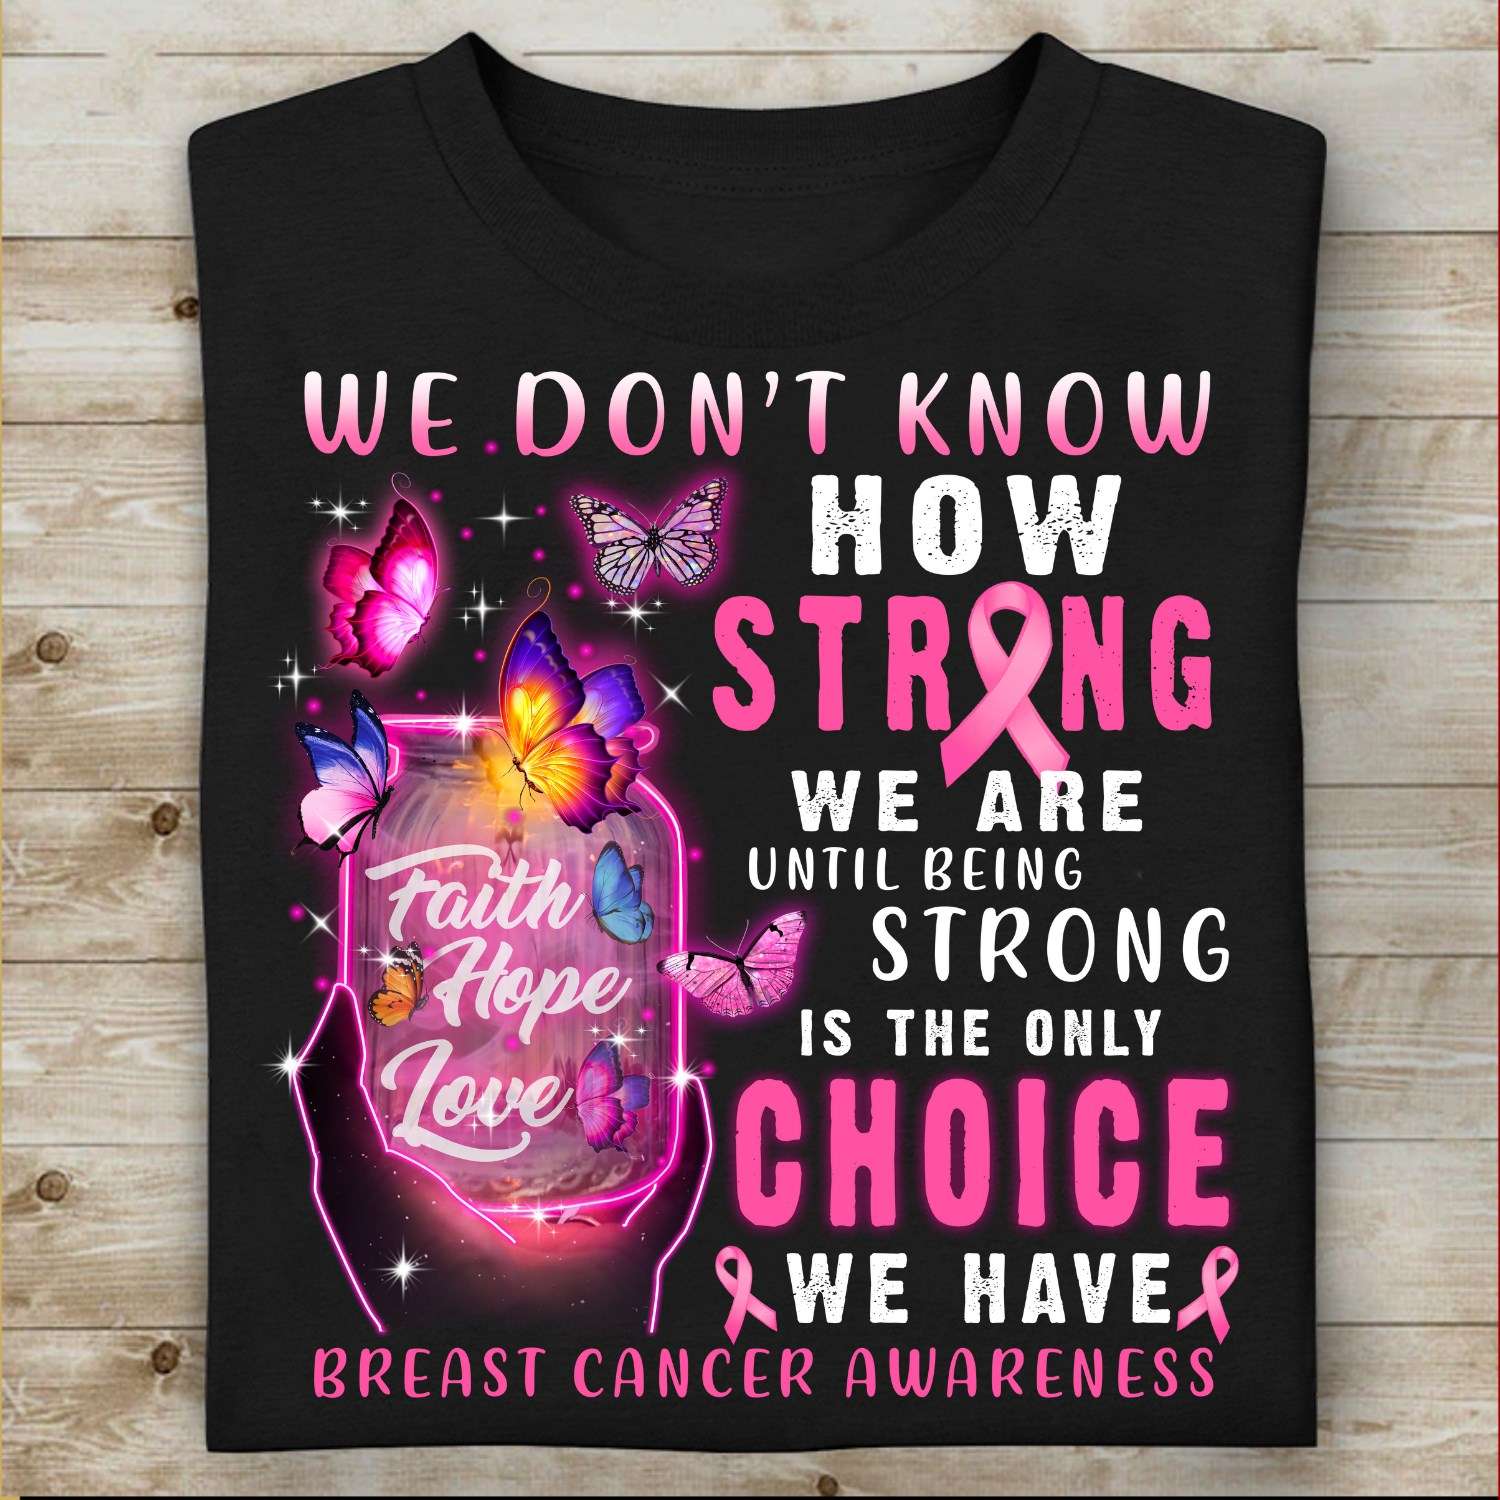 We don't know how strong we are - Breast cancer awareness, breast cancer awareness, strong breast cancer survivor